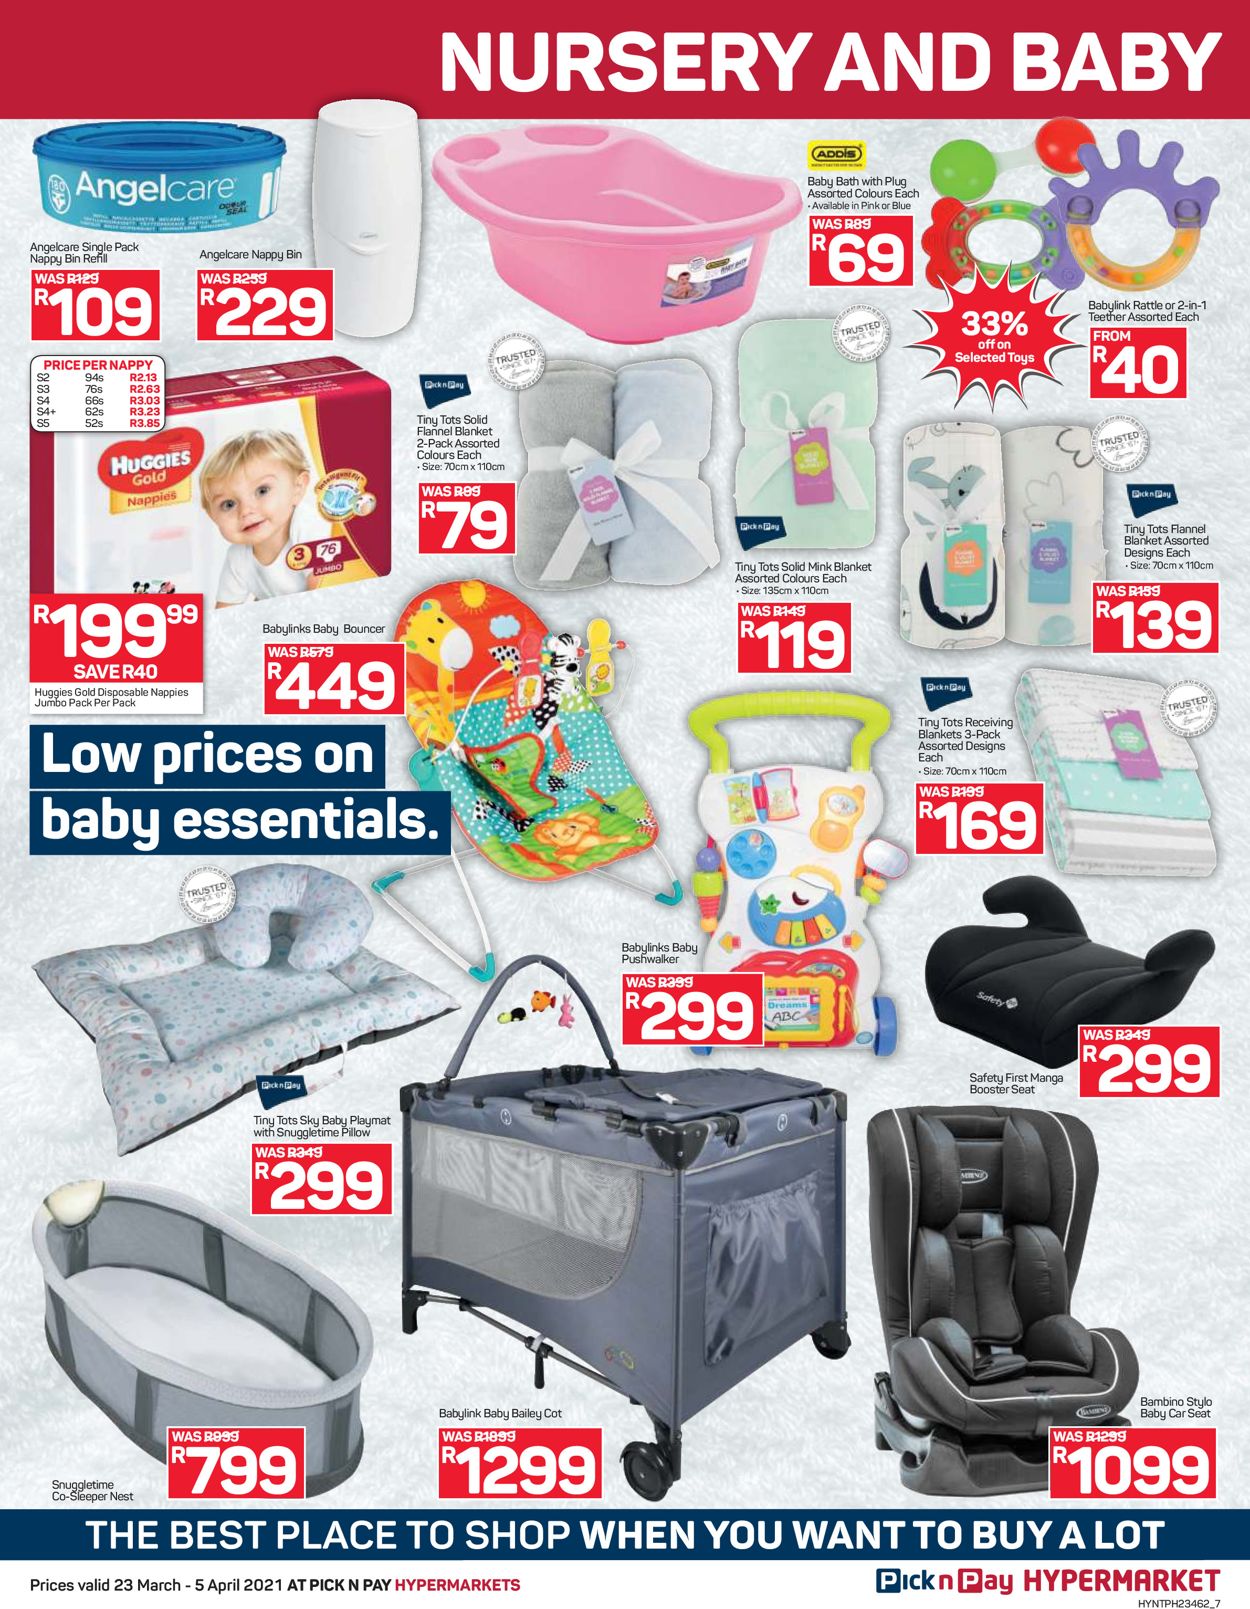 Pick n Pay Catalogue - 2021/03/23-2021/04/05 (Page 7)